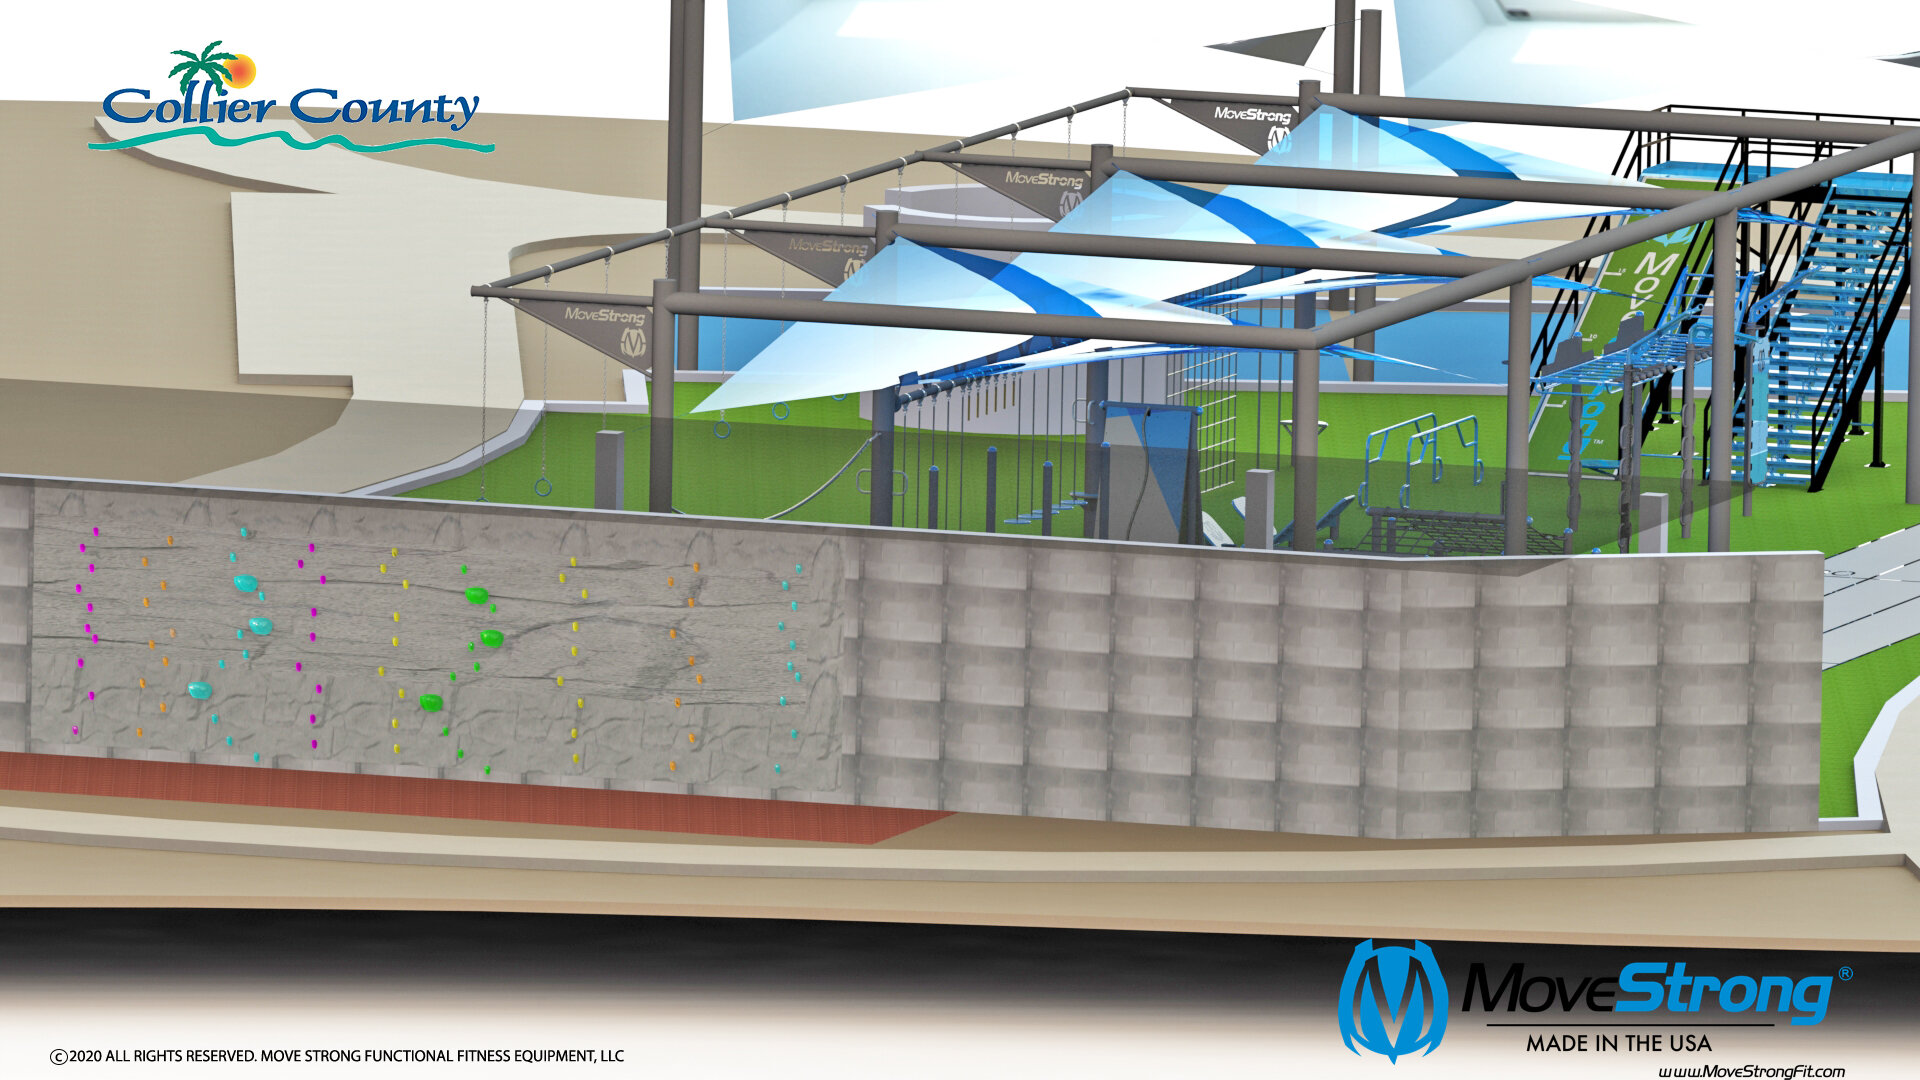 MoveStrong _Collier County_Fitness Pavillion_ Covered area_render_31_FINAL_4-13-20 copy.jpg